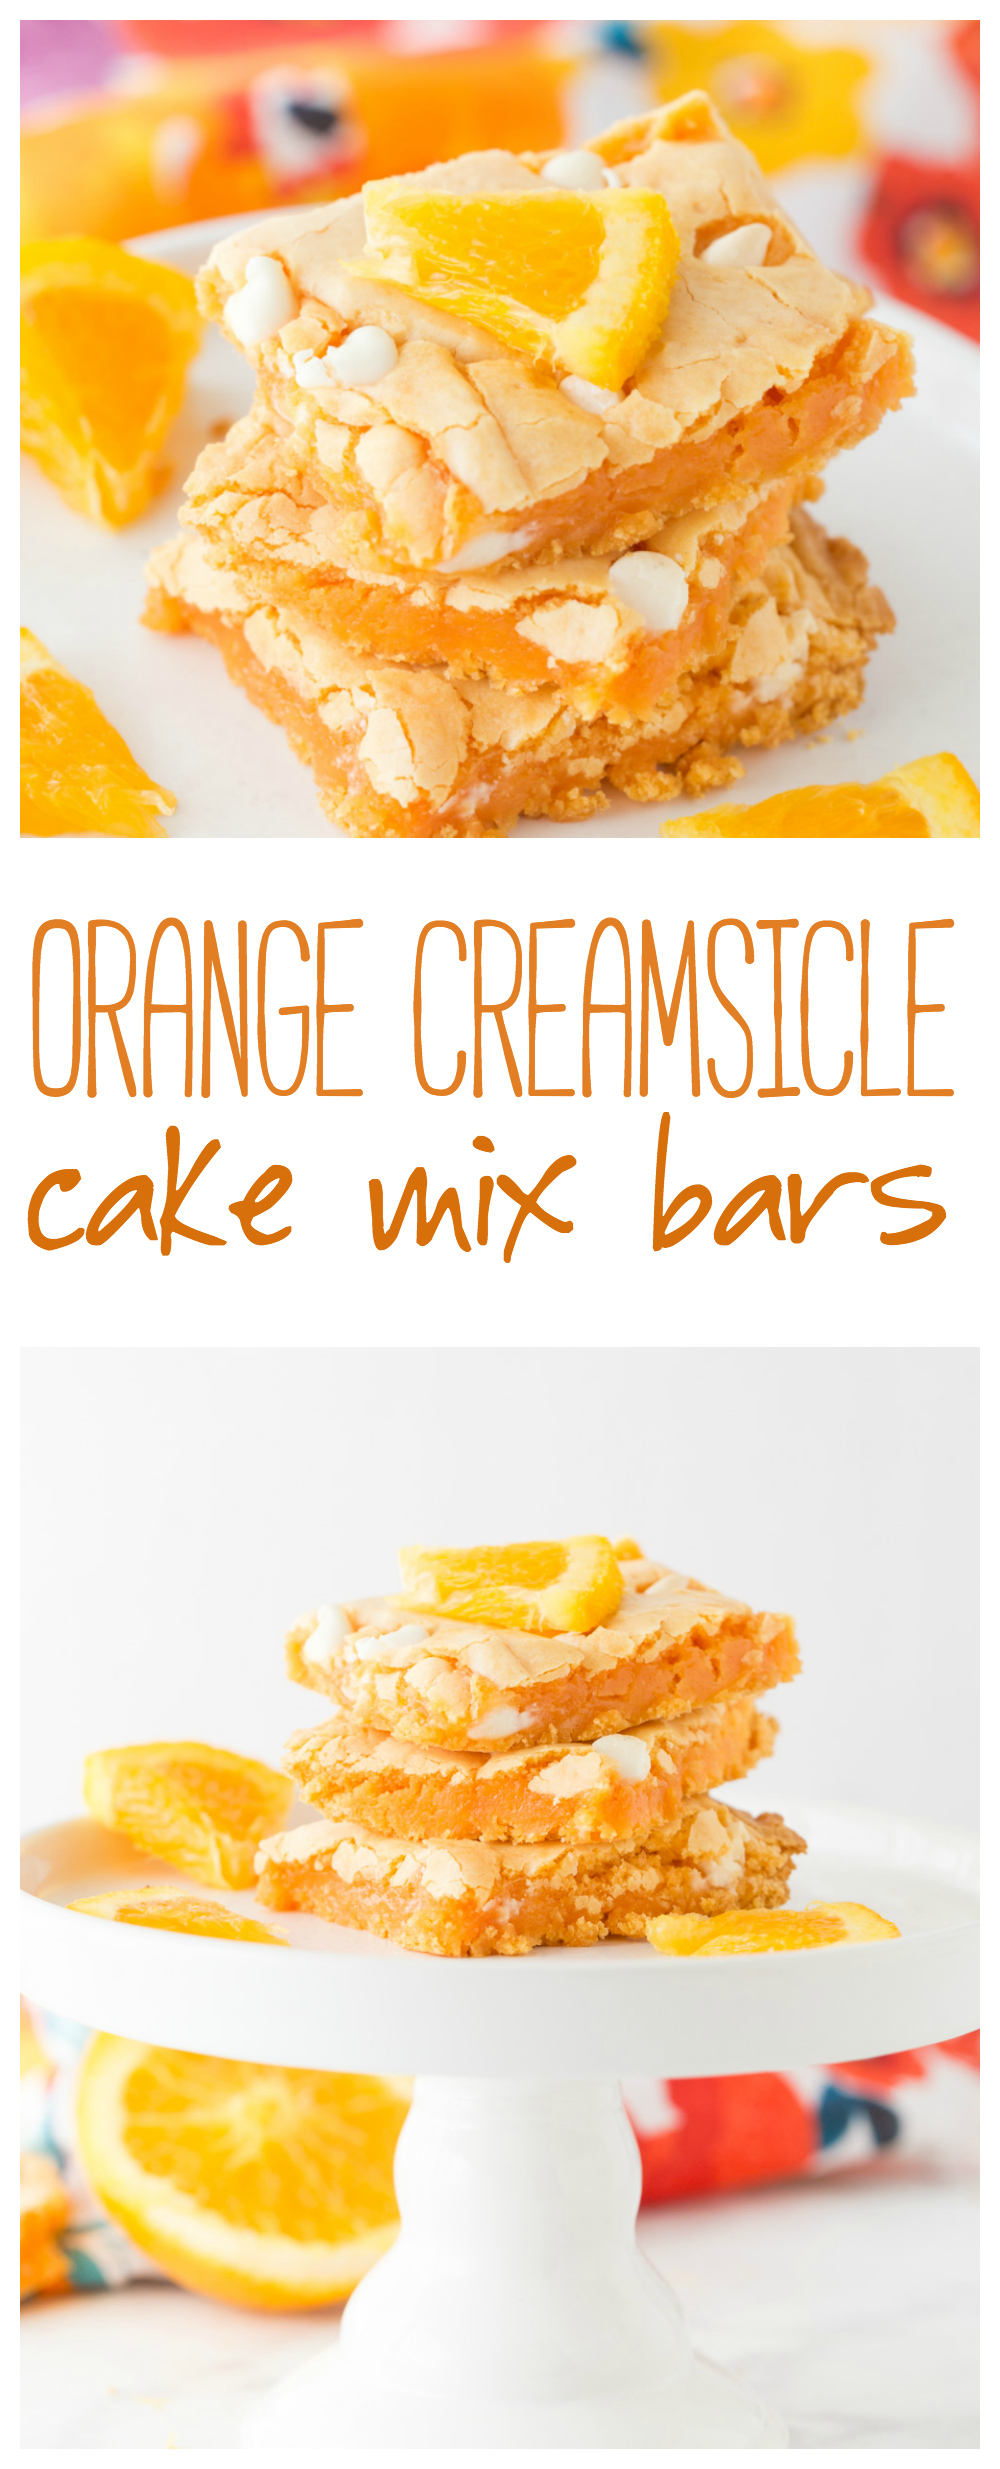 Orange Creamsicle Cake Mix Bars are delicious and bursting with an orange flavor. The white chocolate chips adds the perfect bite of creaminess!